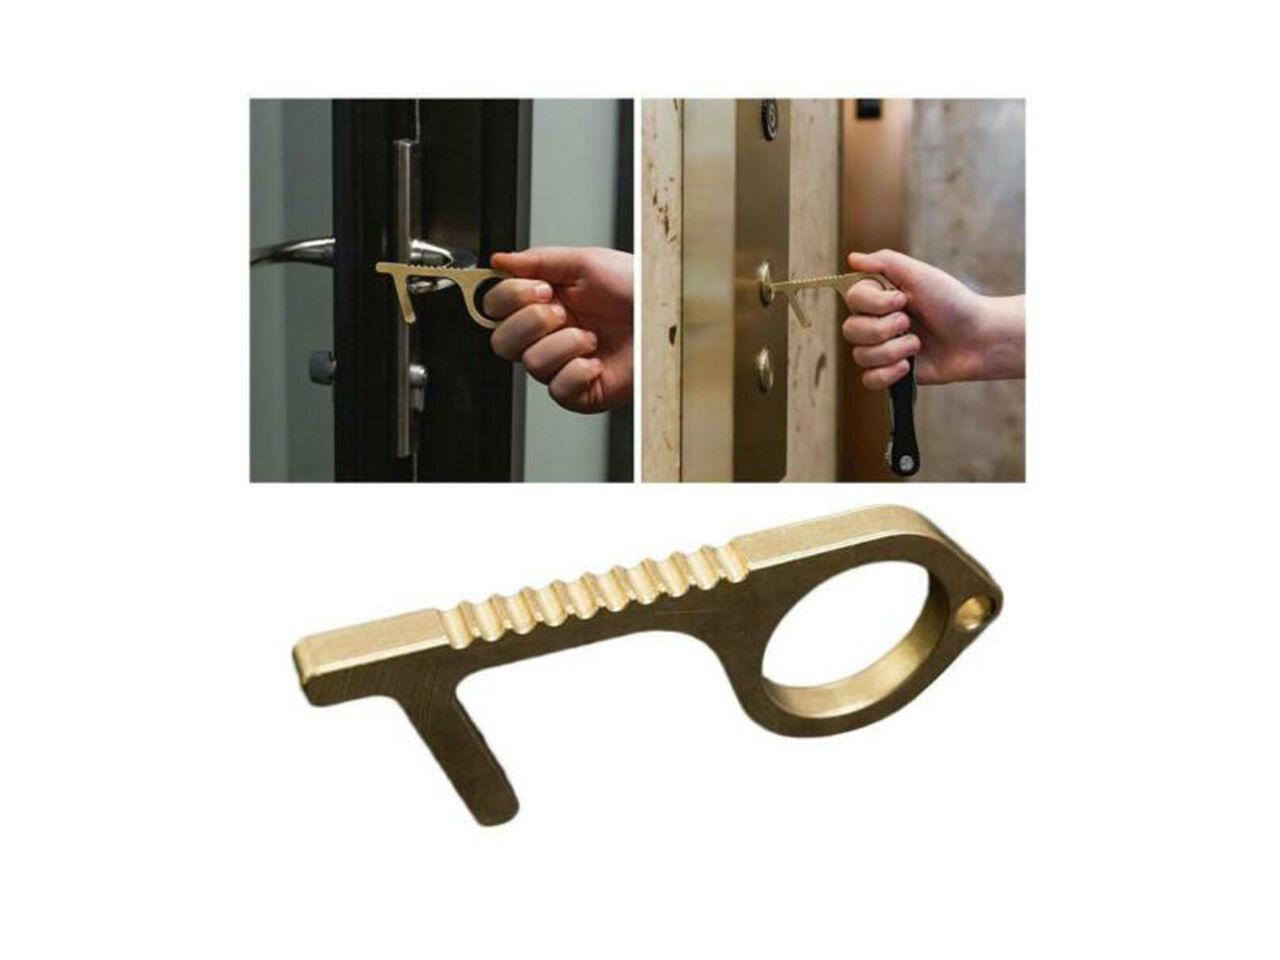 No Touch Clean Key Hygienic Hand Anti-microbial Door Elevator Handle Tool 